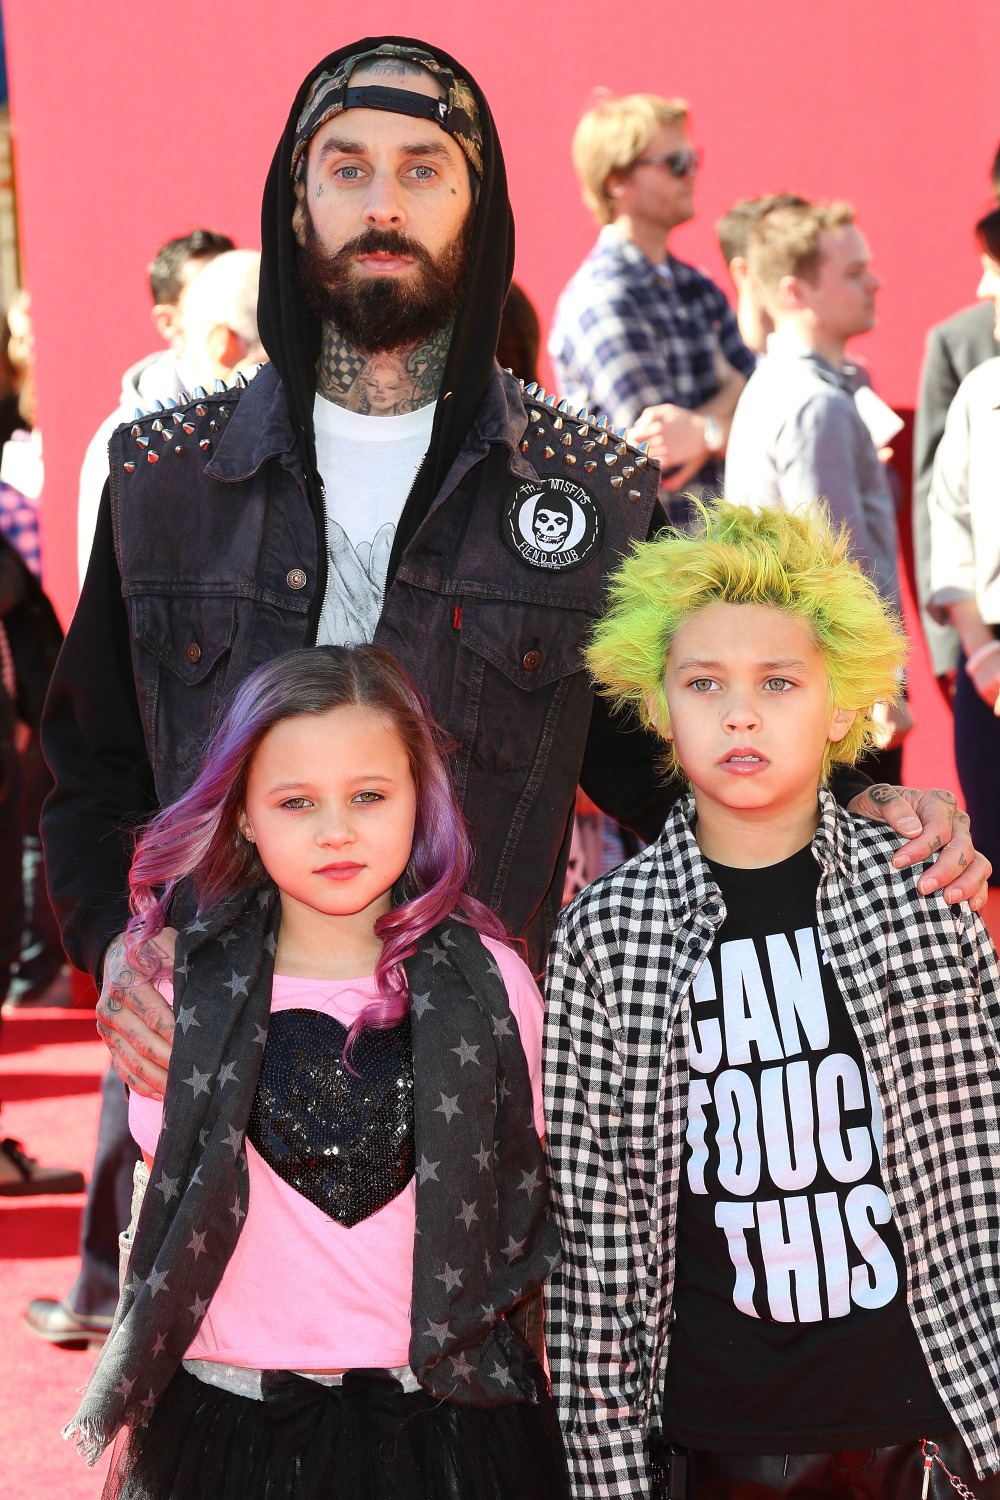 Rock Star Travis Barker S Kids Are All Grown Up And Gorgeous See Them Today Life Style And travis barker appeared in high spirits as he stepped out with his children landon, 14, and alabama, 12, at universal studios hollywood's. https www lifeandstylemag com posts travis barker kids all grown up 105131